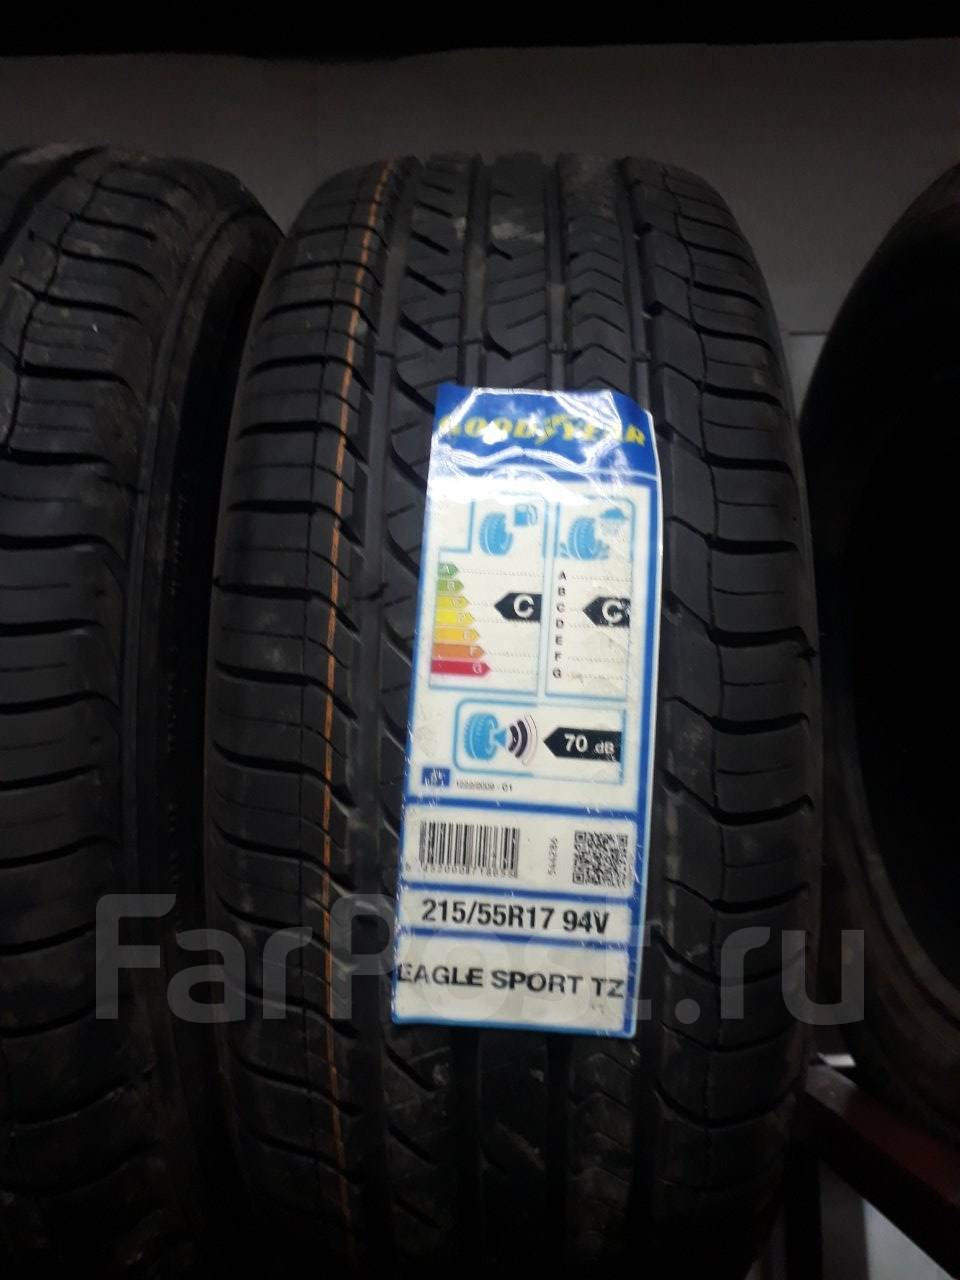 Goodyear eagle sport 215 55. Гудиер игл спорт TZ 215/55/17. Goodyear Eagle Sport TZ 215/55r17. Goodyear Eagle Sport TZ. 215 55 17 Goodyear.